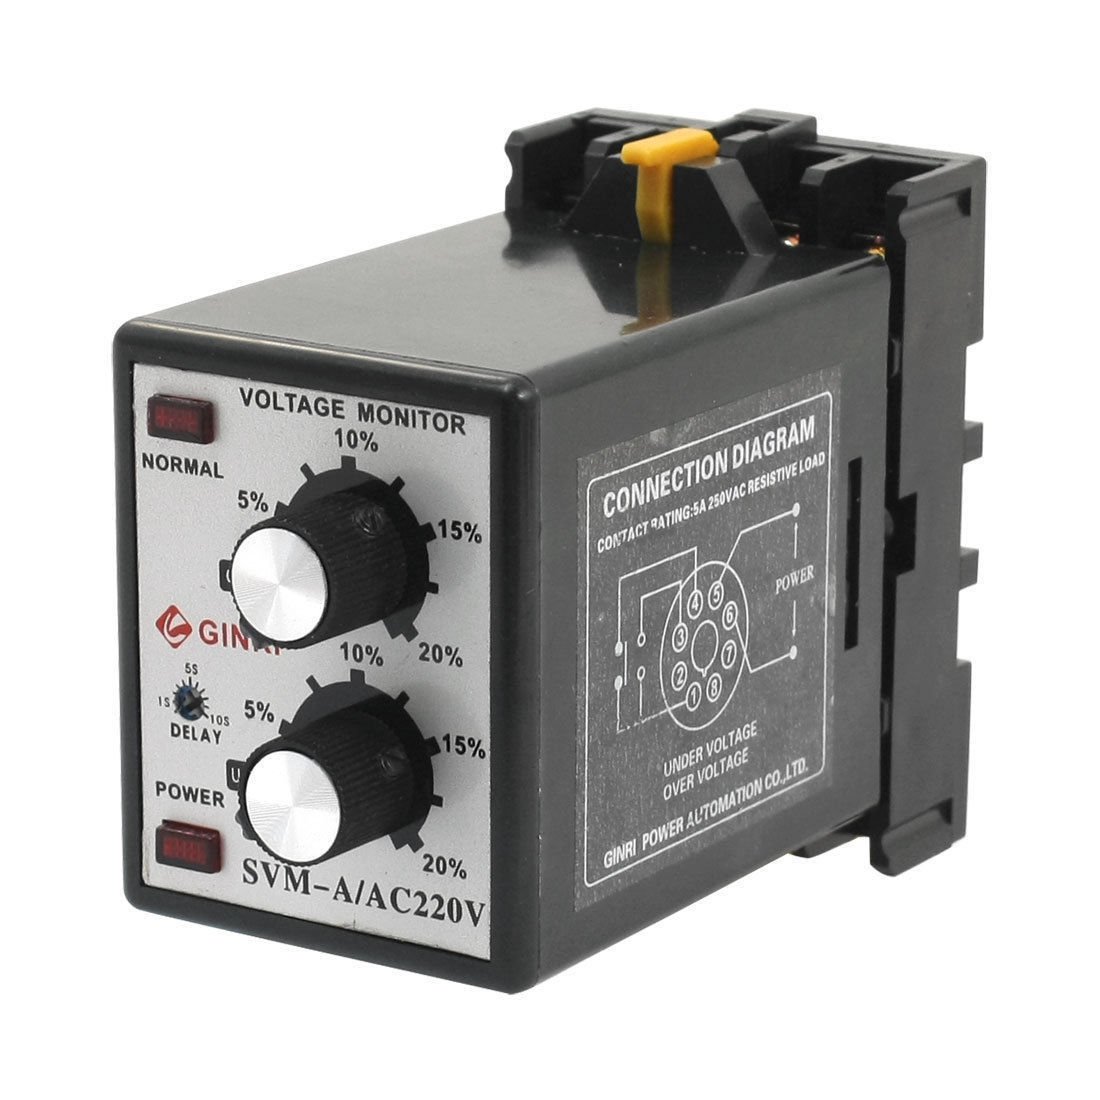 SVM-A AC 220V Protective Adjustable Over/Under Voltage Monitoring Relay